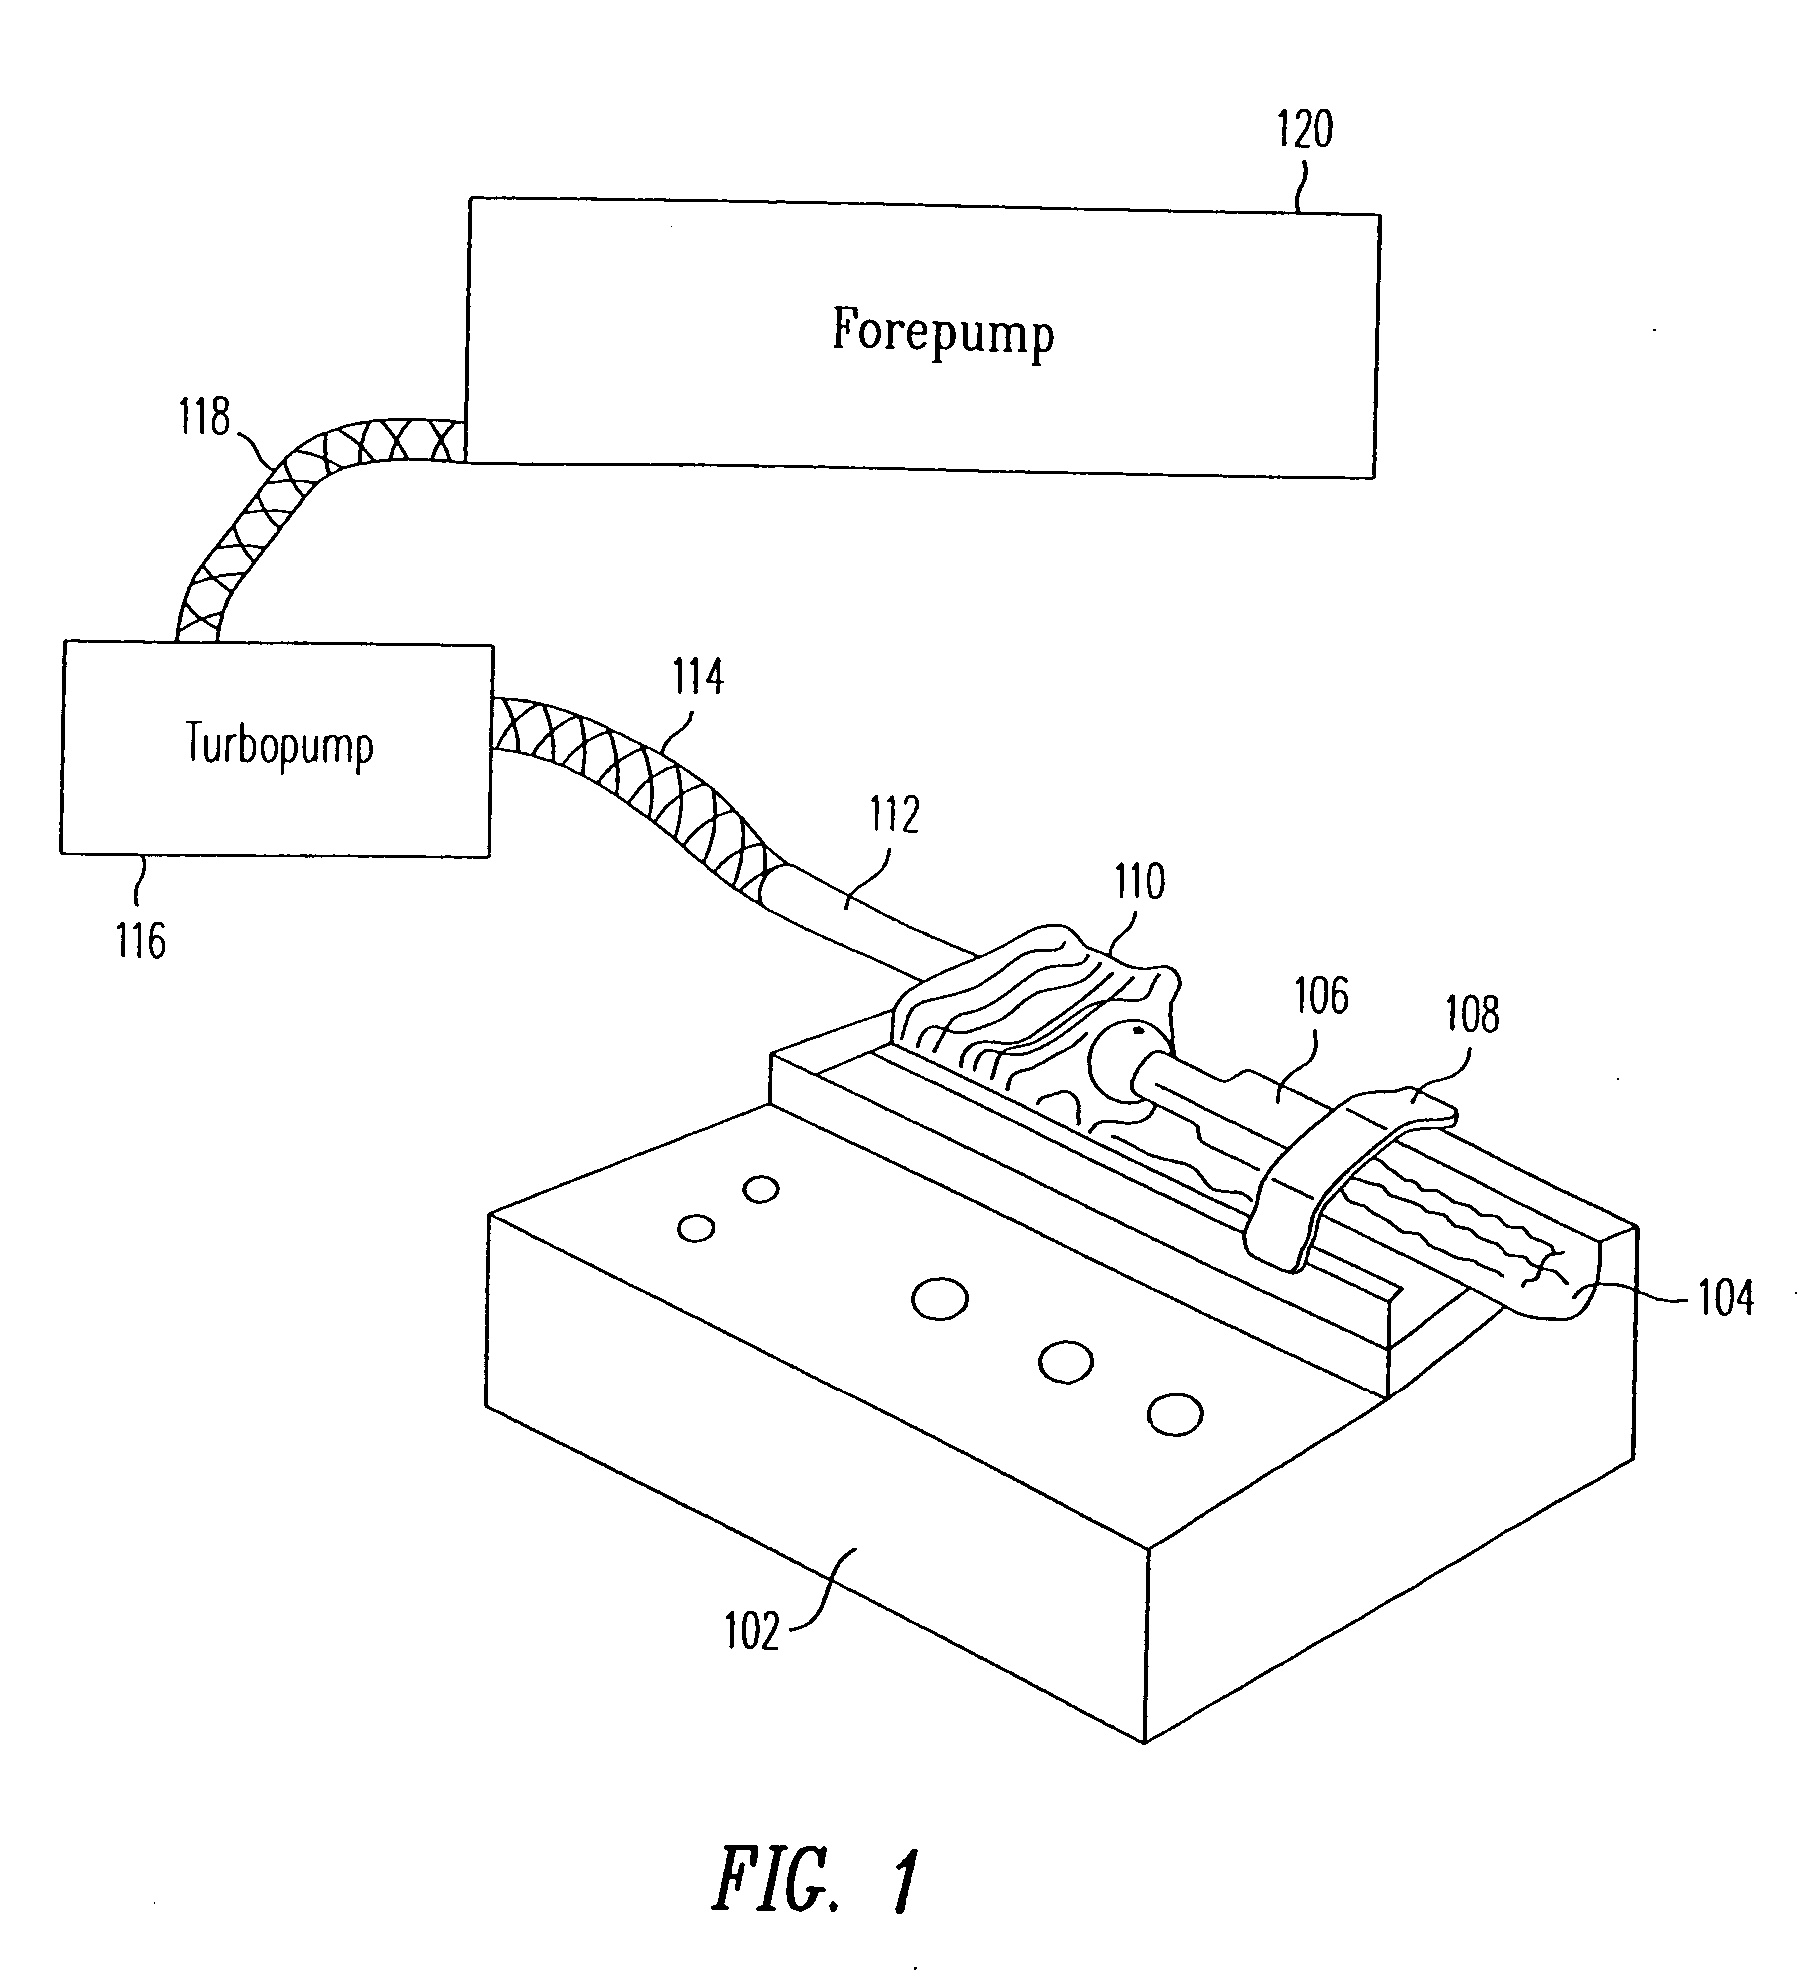 Standards for the calibration of a vacuum thermogravimetric analyzer for determination of vapor pressures of compounds